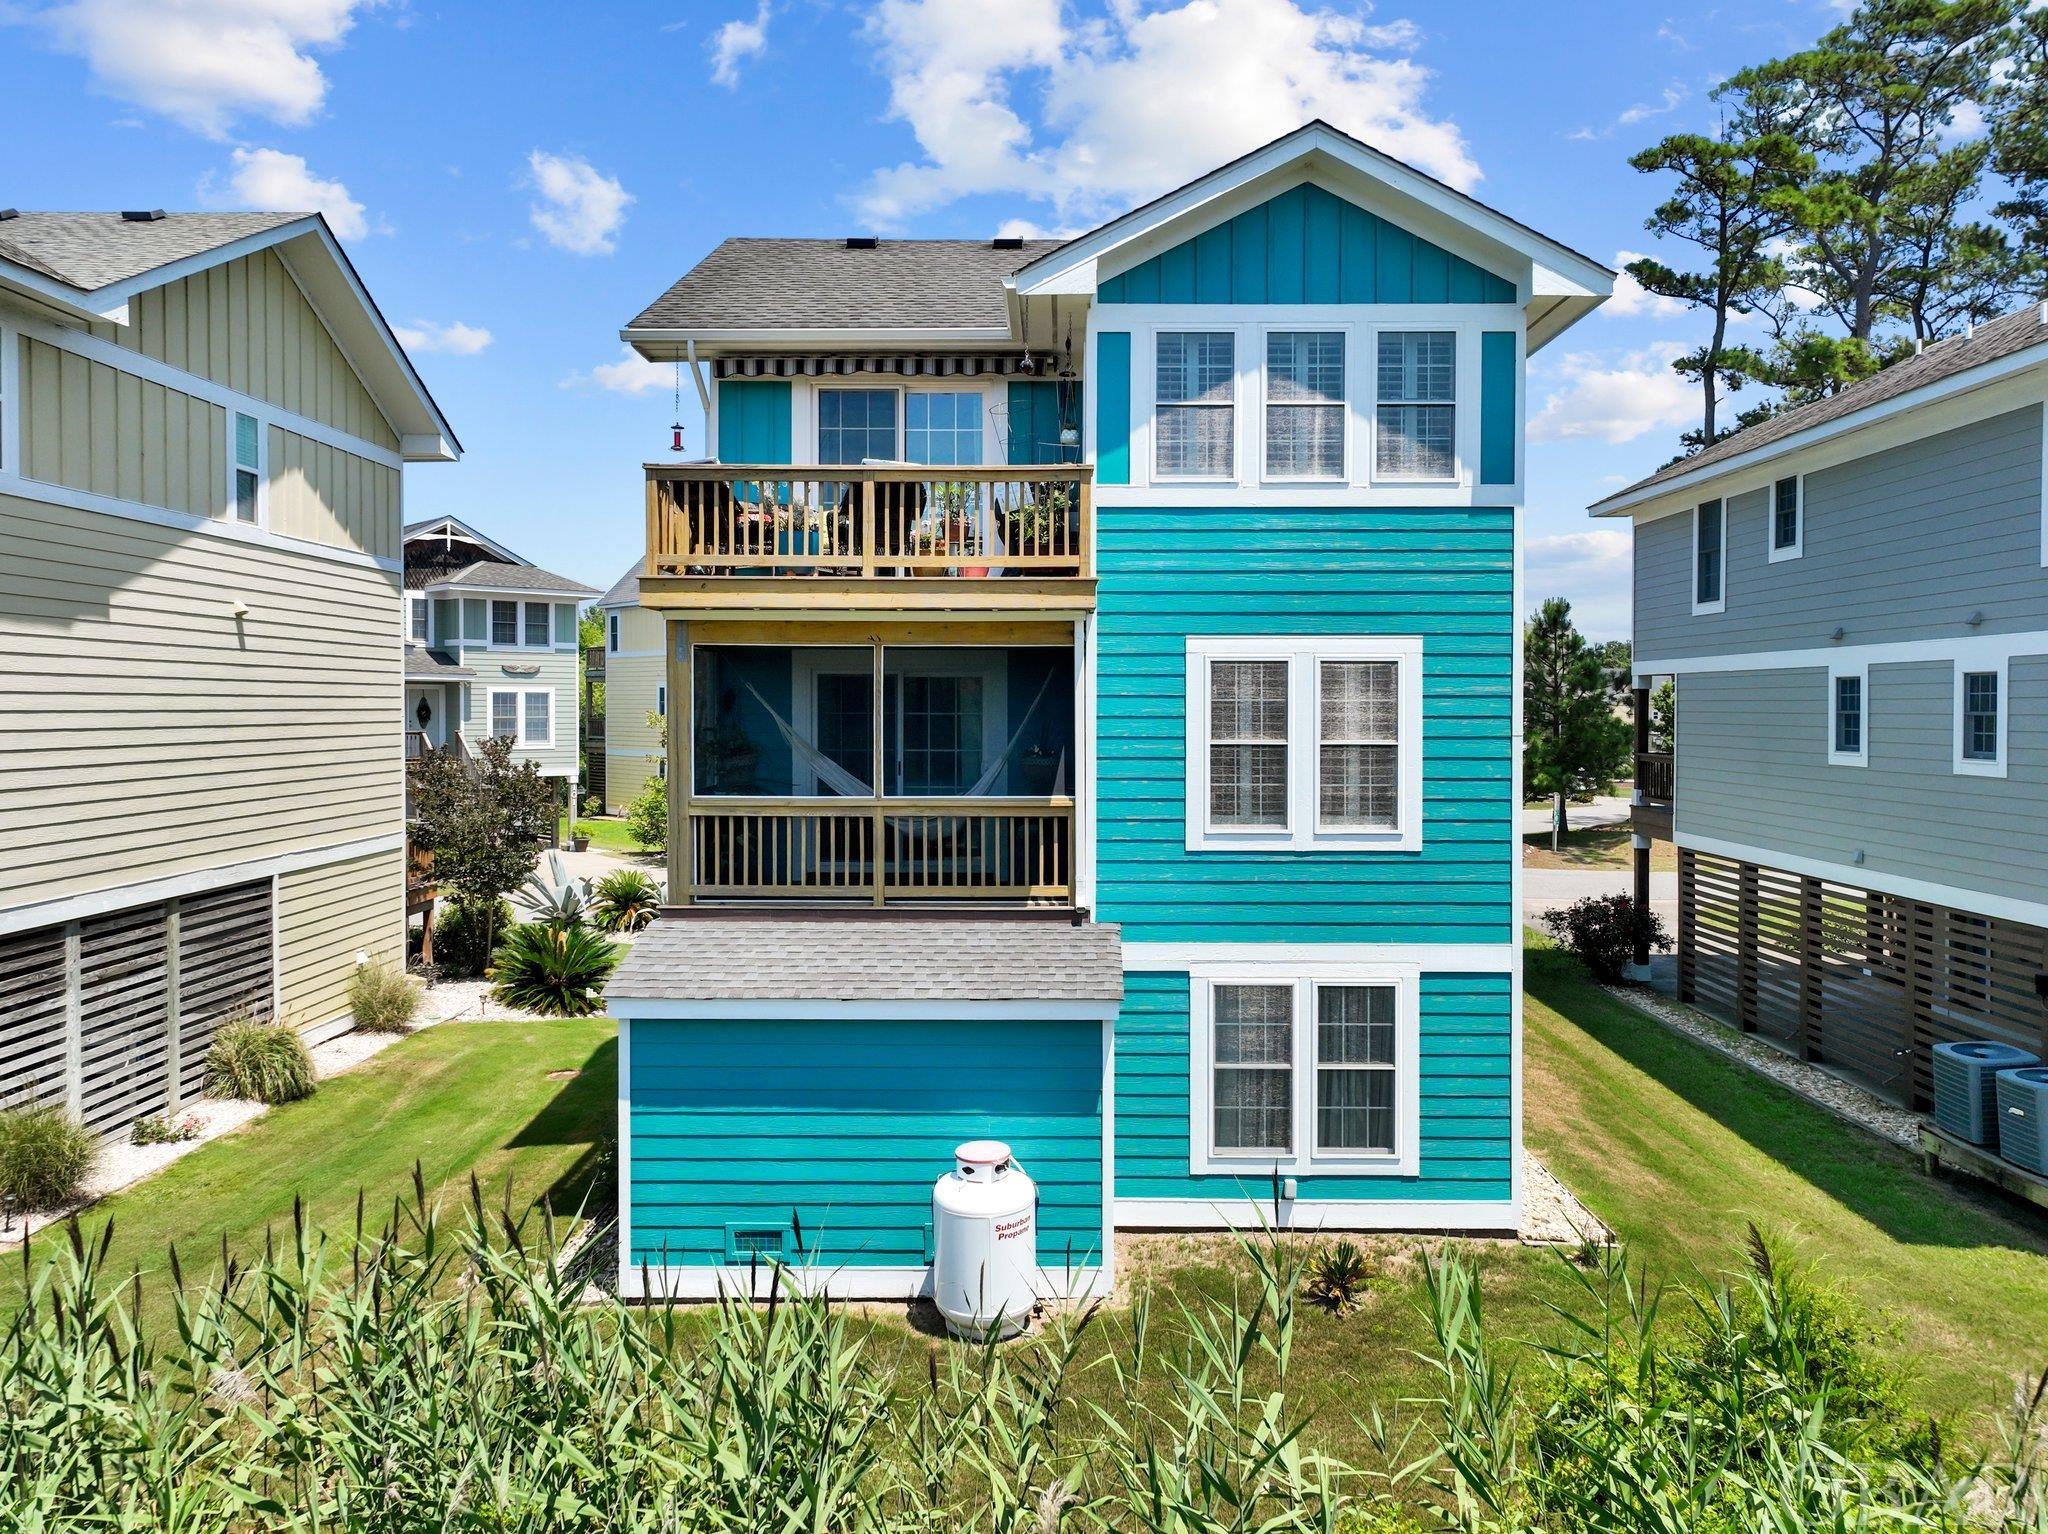 100 Amherst Drive, Kill Devil Hills, NC 27948, 3 Bedrooms Bedrooms, ,3 BathroomsBathrooms,Residential,For sale,Amherst Drive,122727